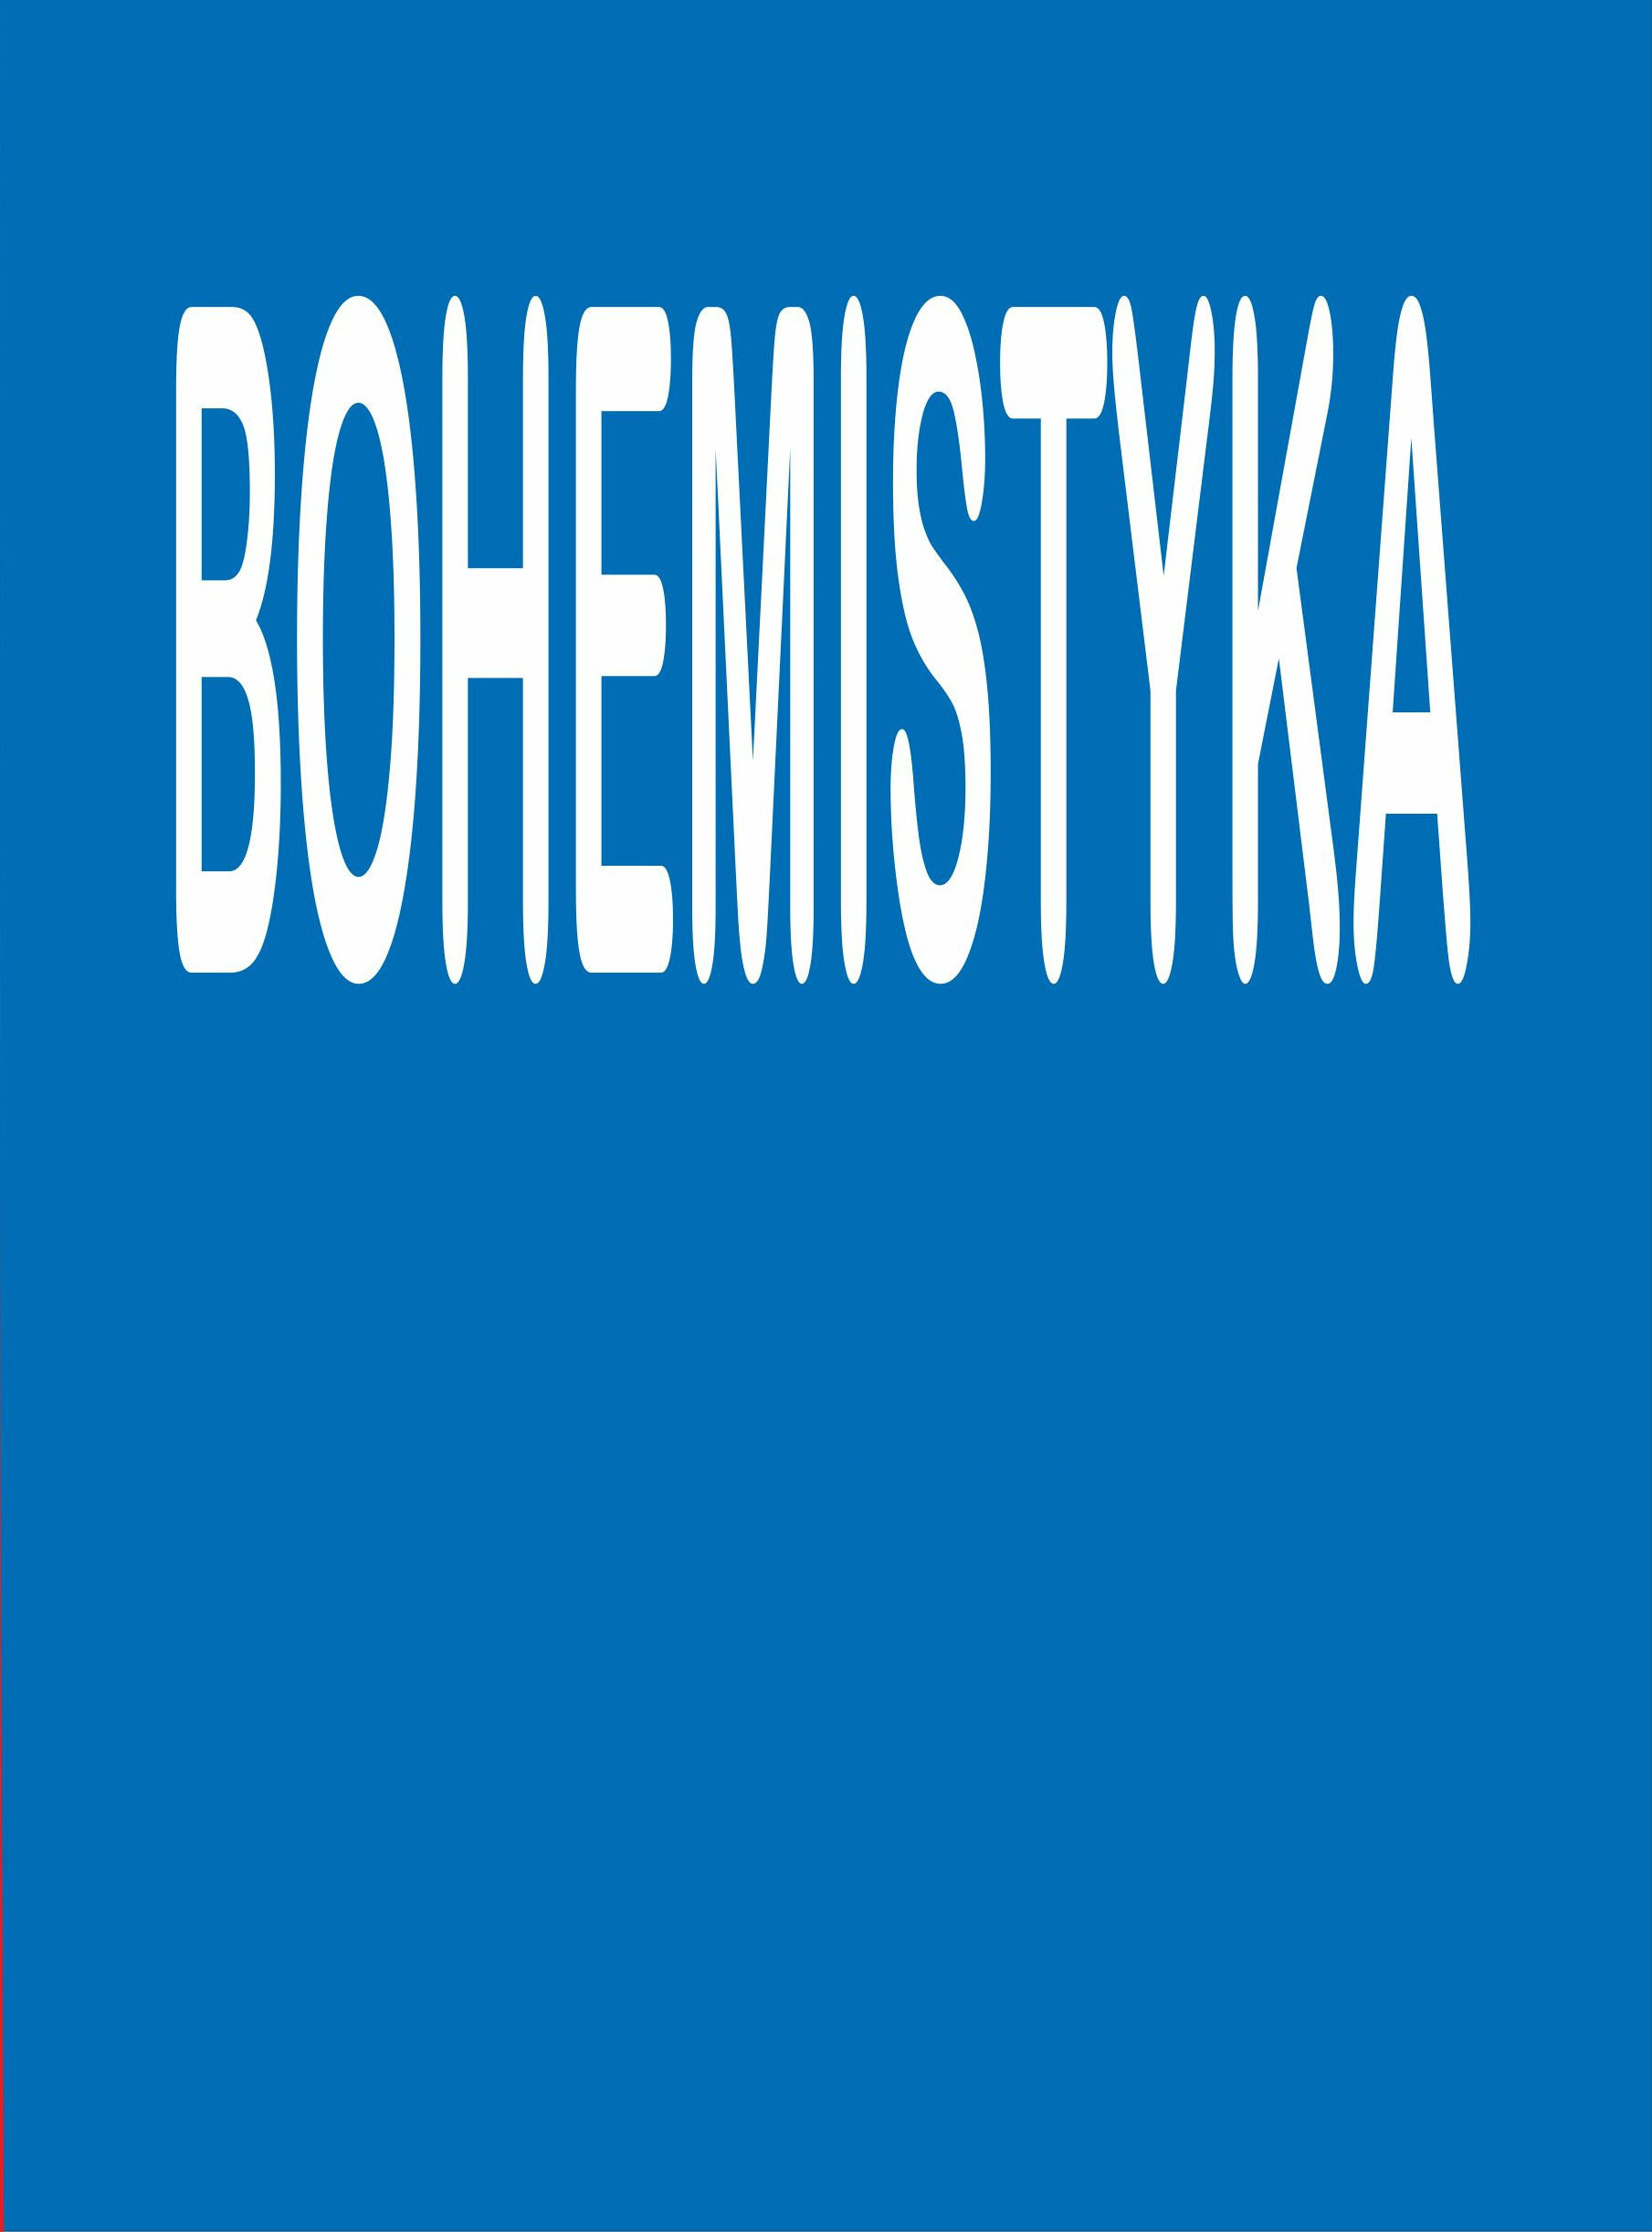 Aphorisms of Jan Sobotka against the background of the current Czech aphorisms Cover Image